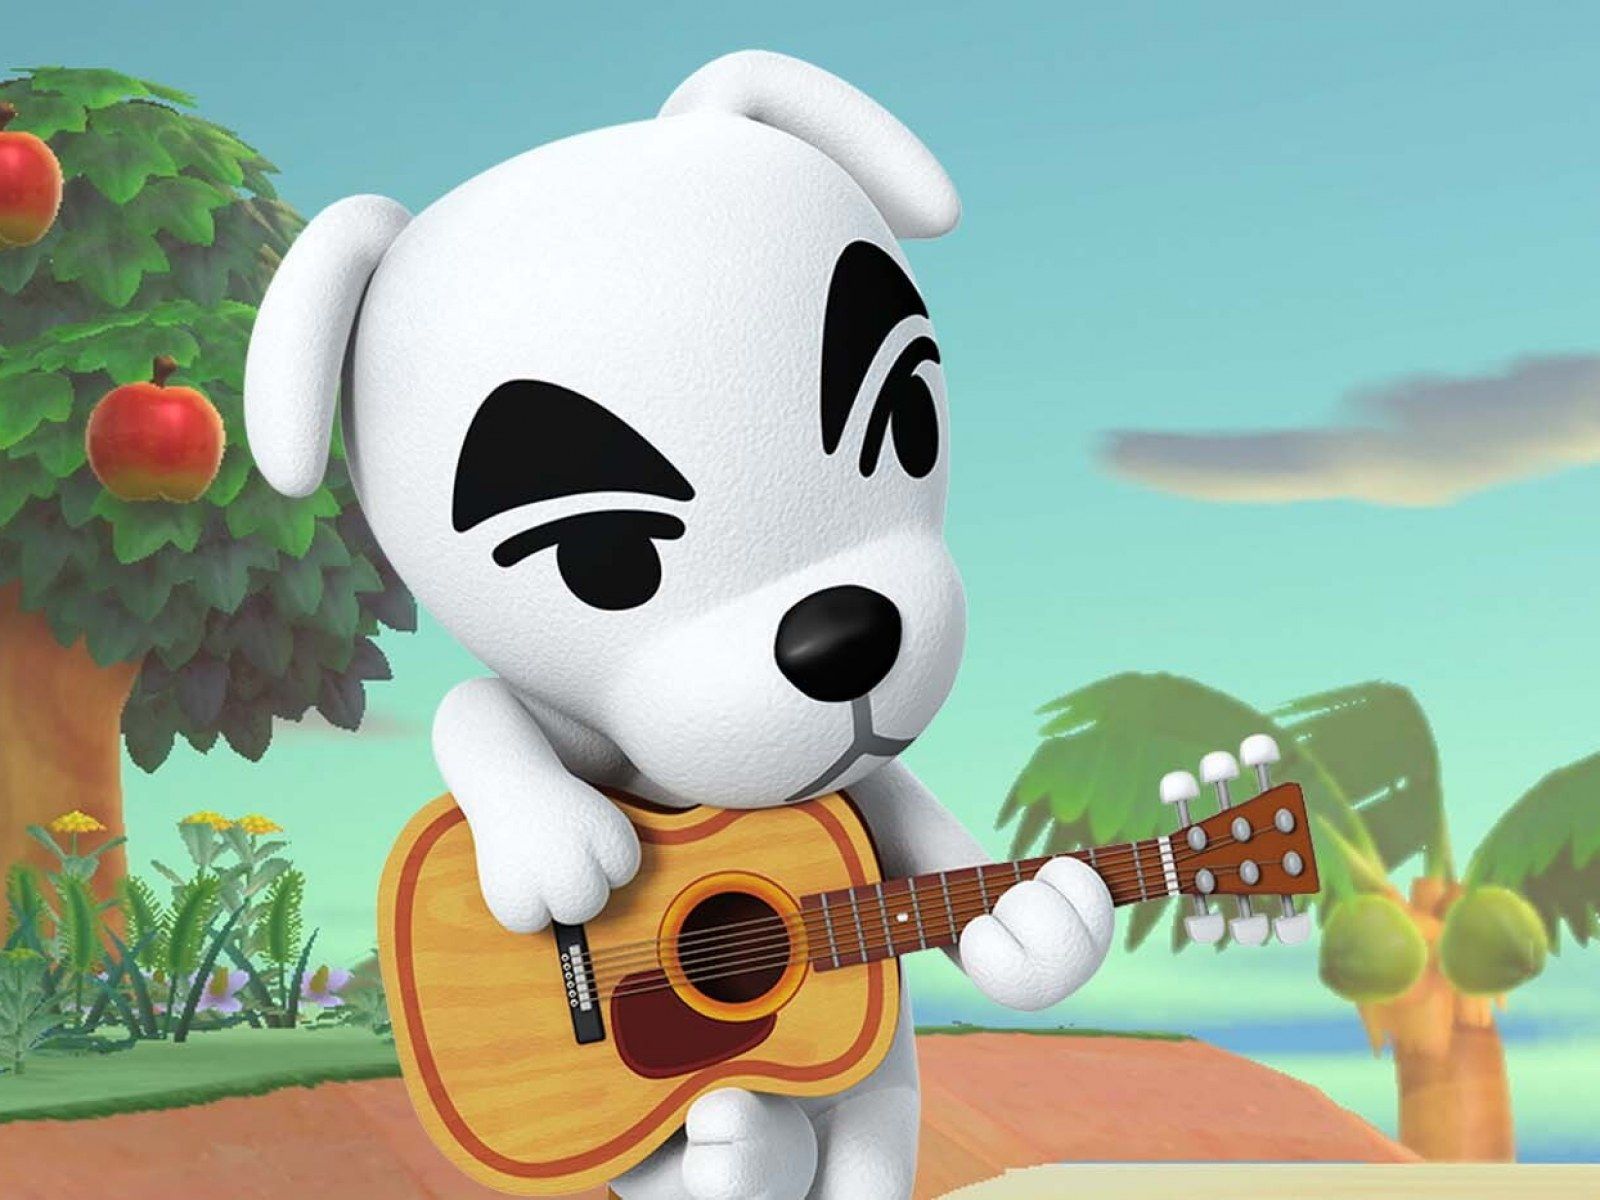 Animal Crossing' Fans are Reworking Album Covers to Feature K.K. Slider